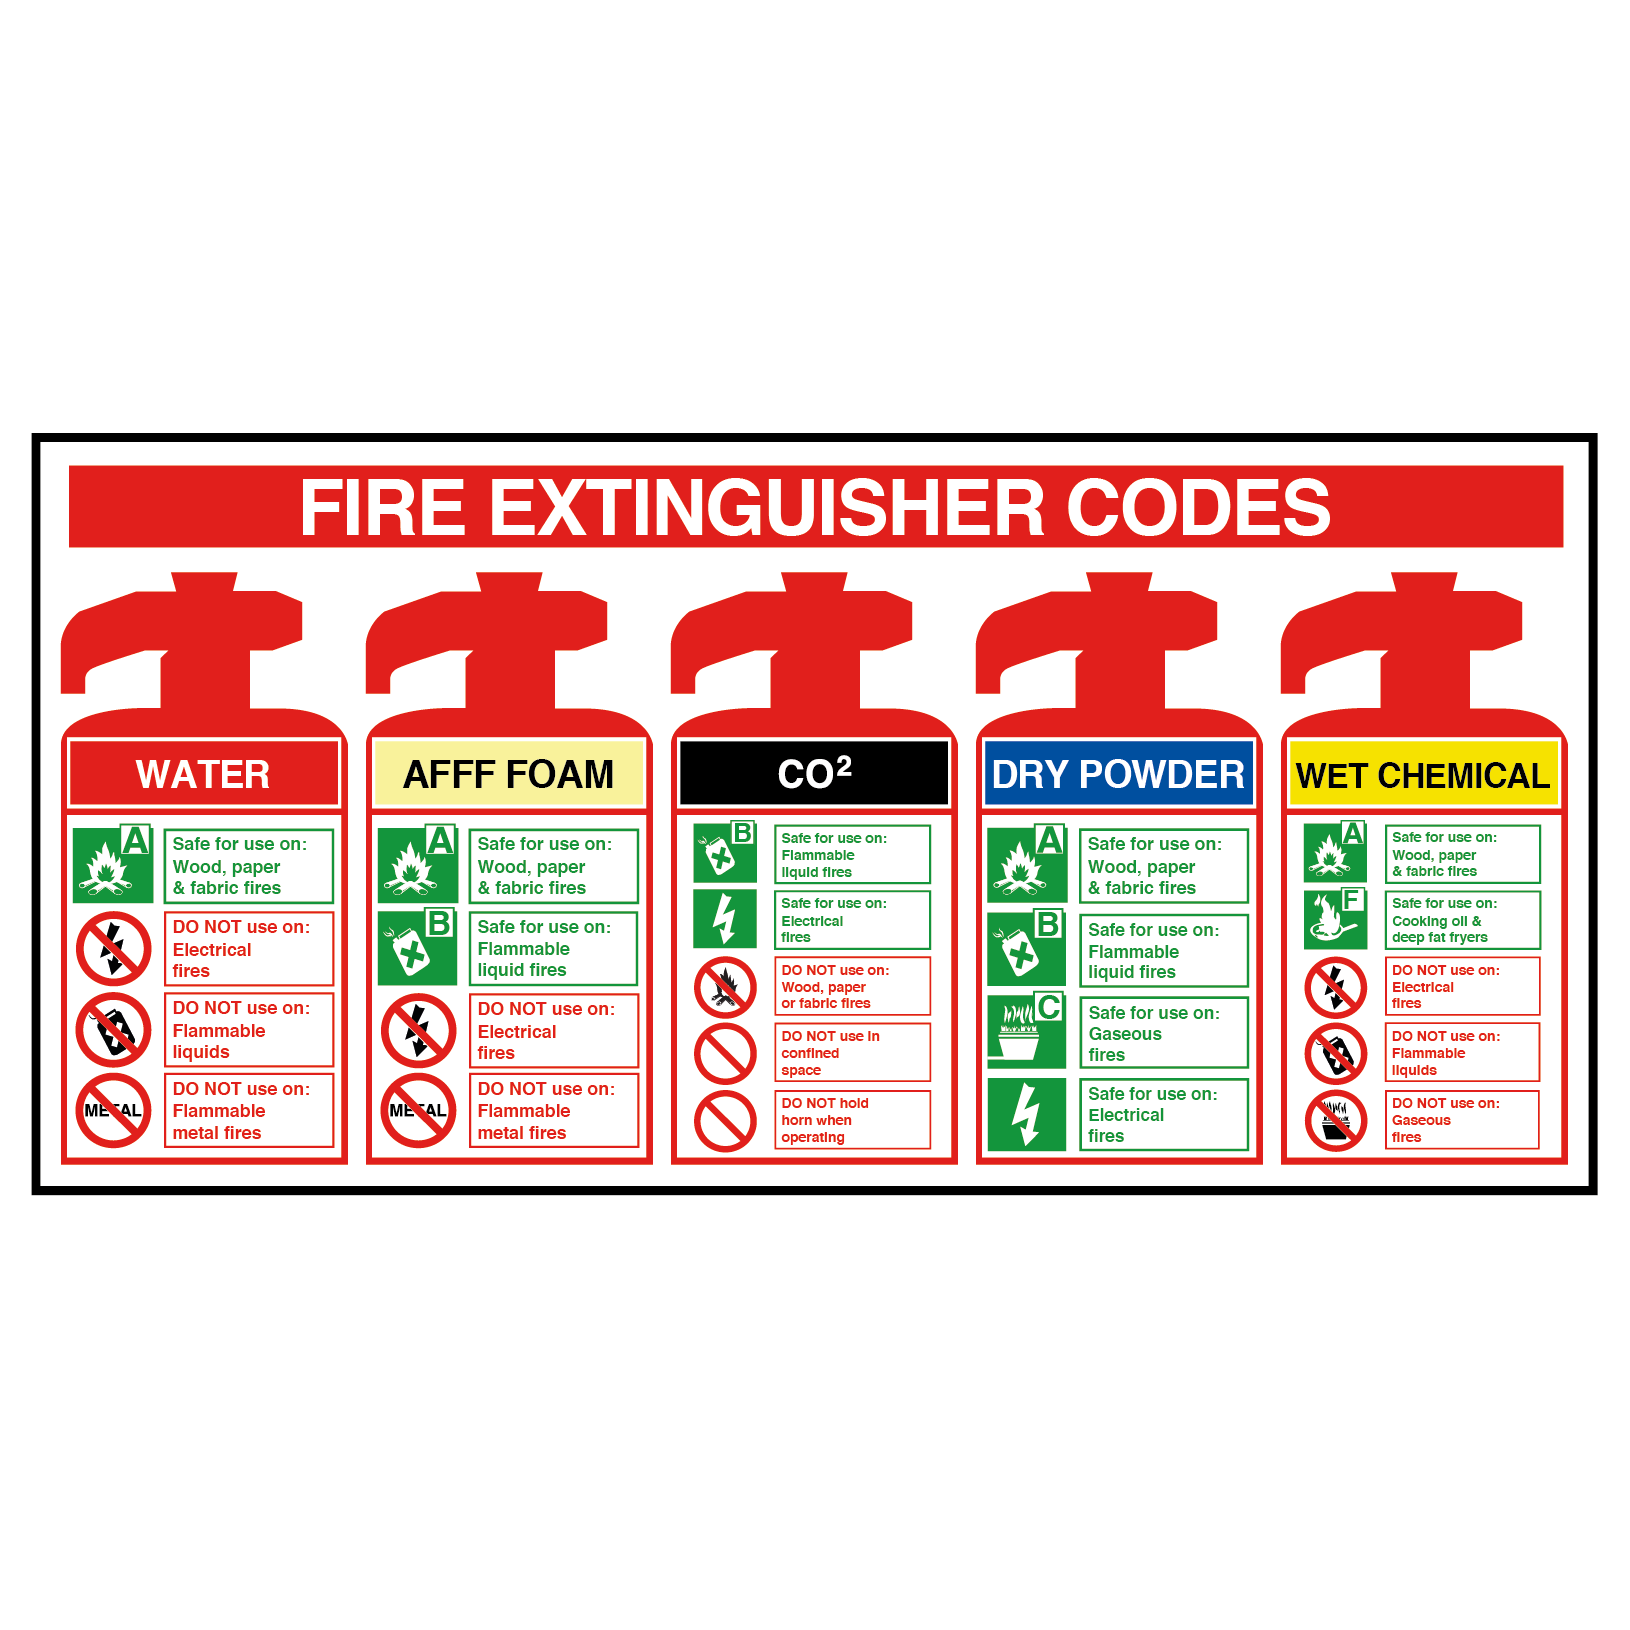 Fire Extinguisher Codes Notice with AFFF Foam